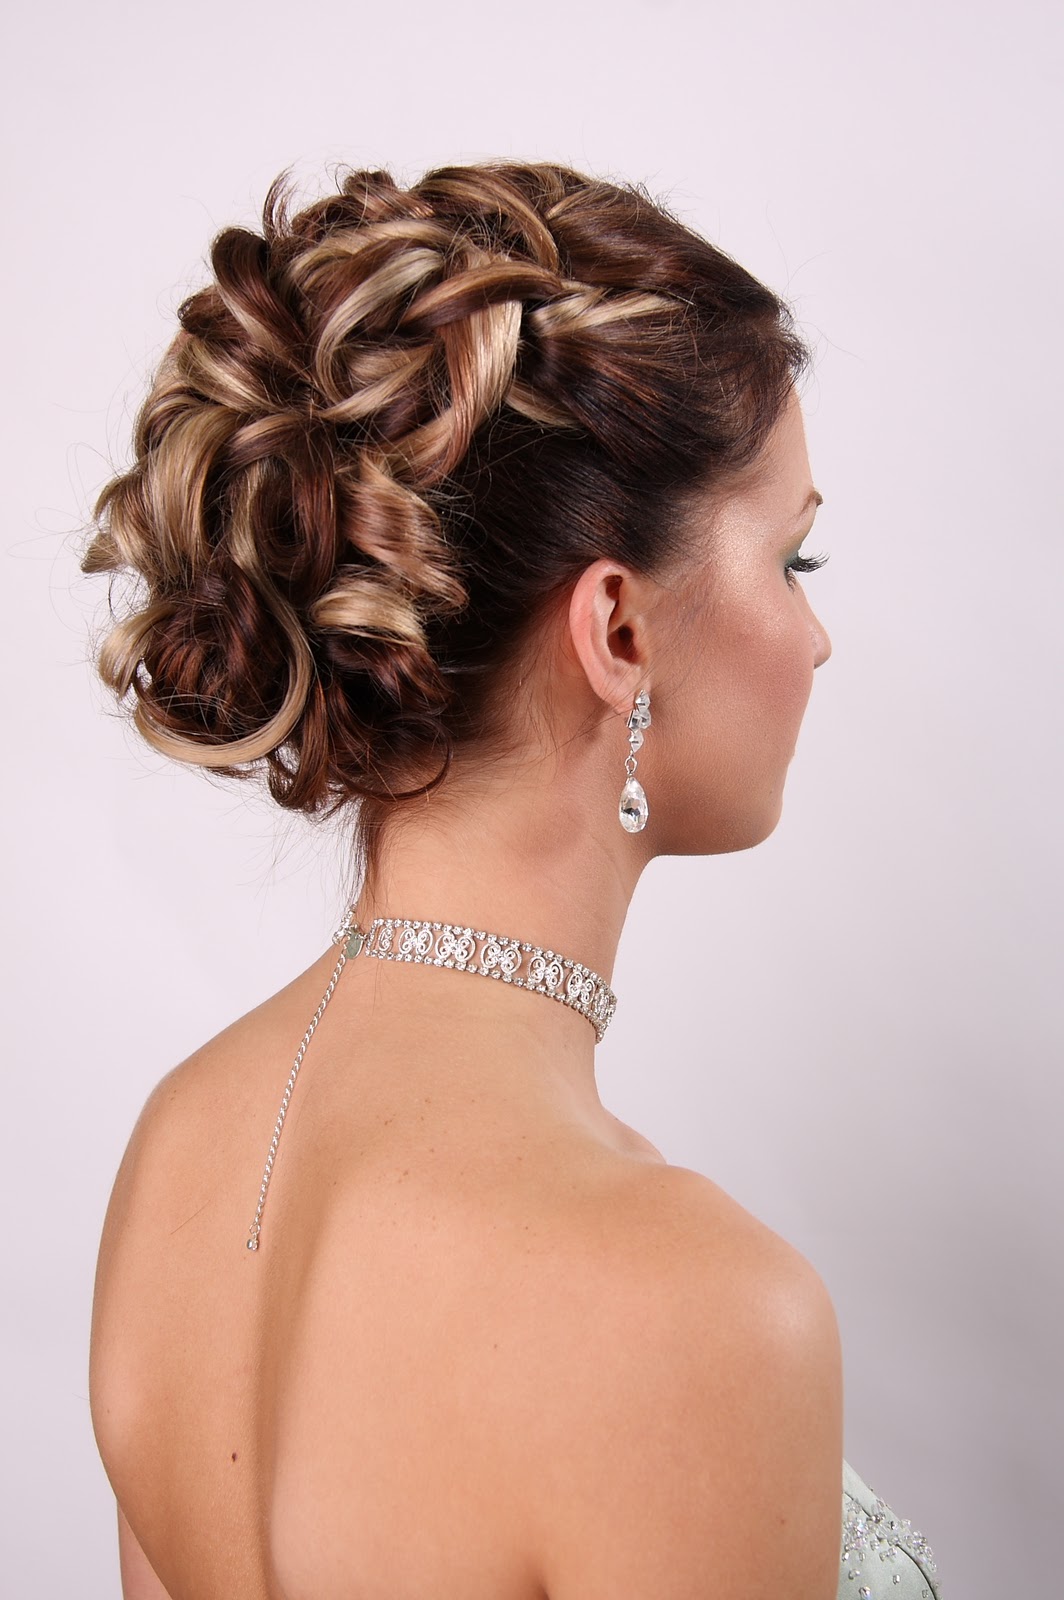 20 Classic Wedding Hairstyles Long Hair - MagMent